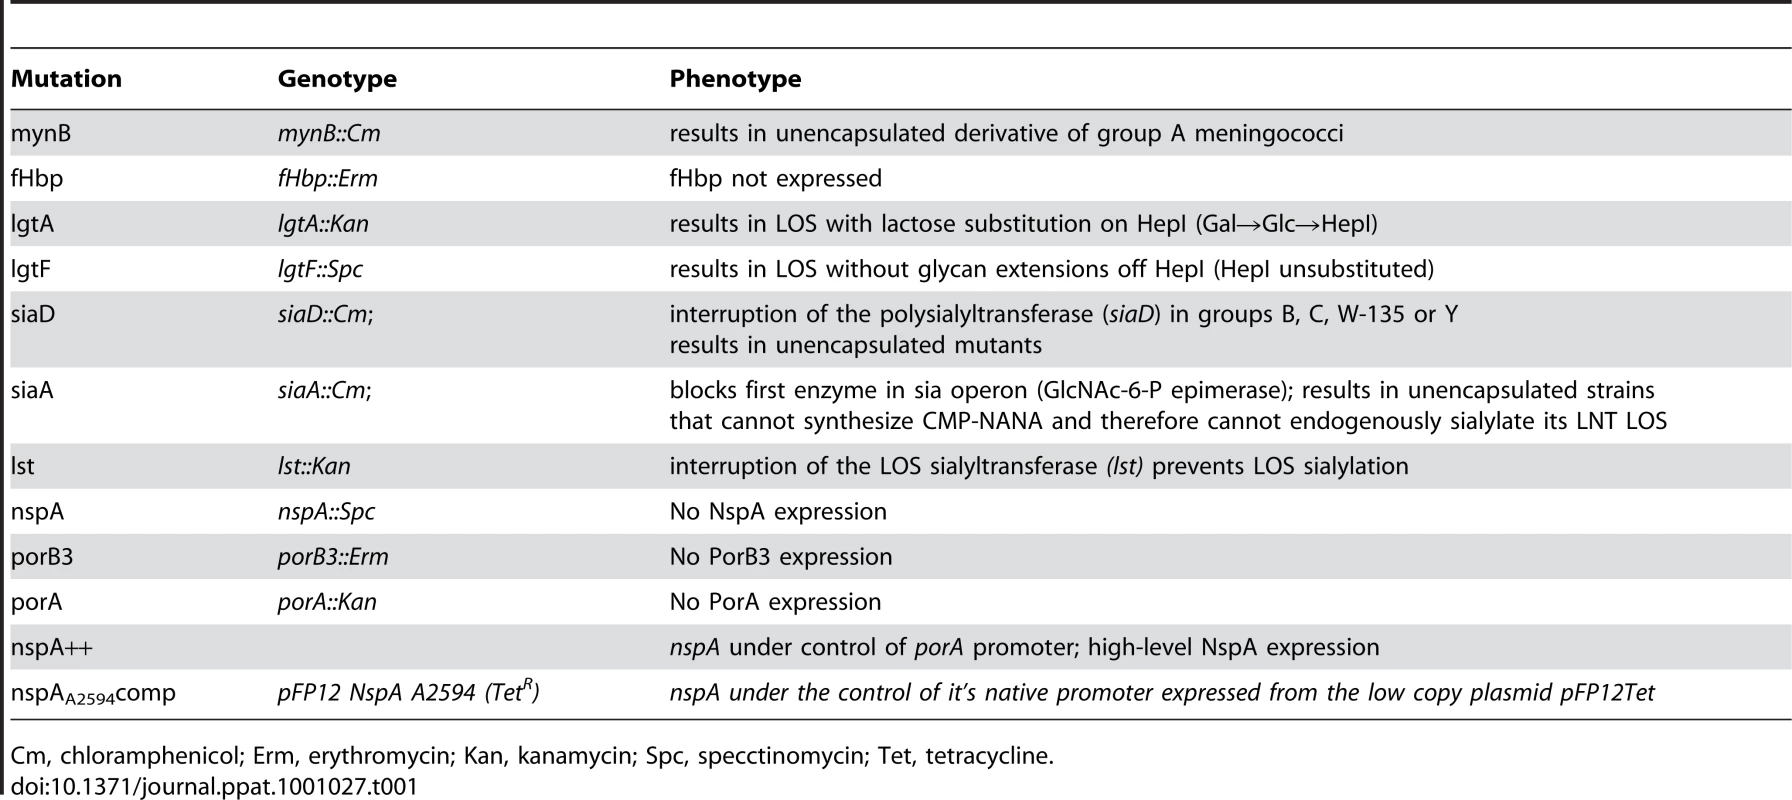 Description of genotype and phenotype of mutations used in this study.